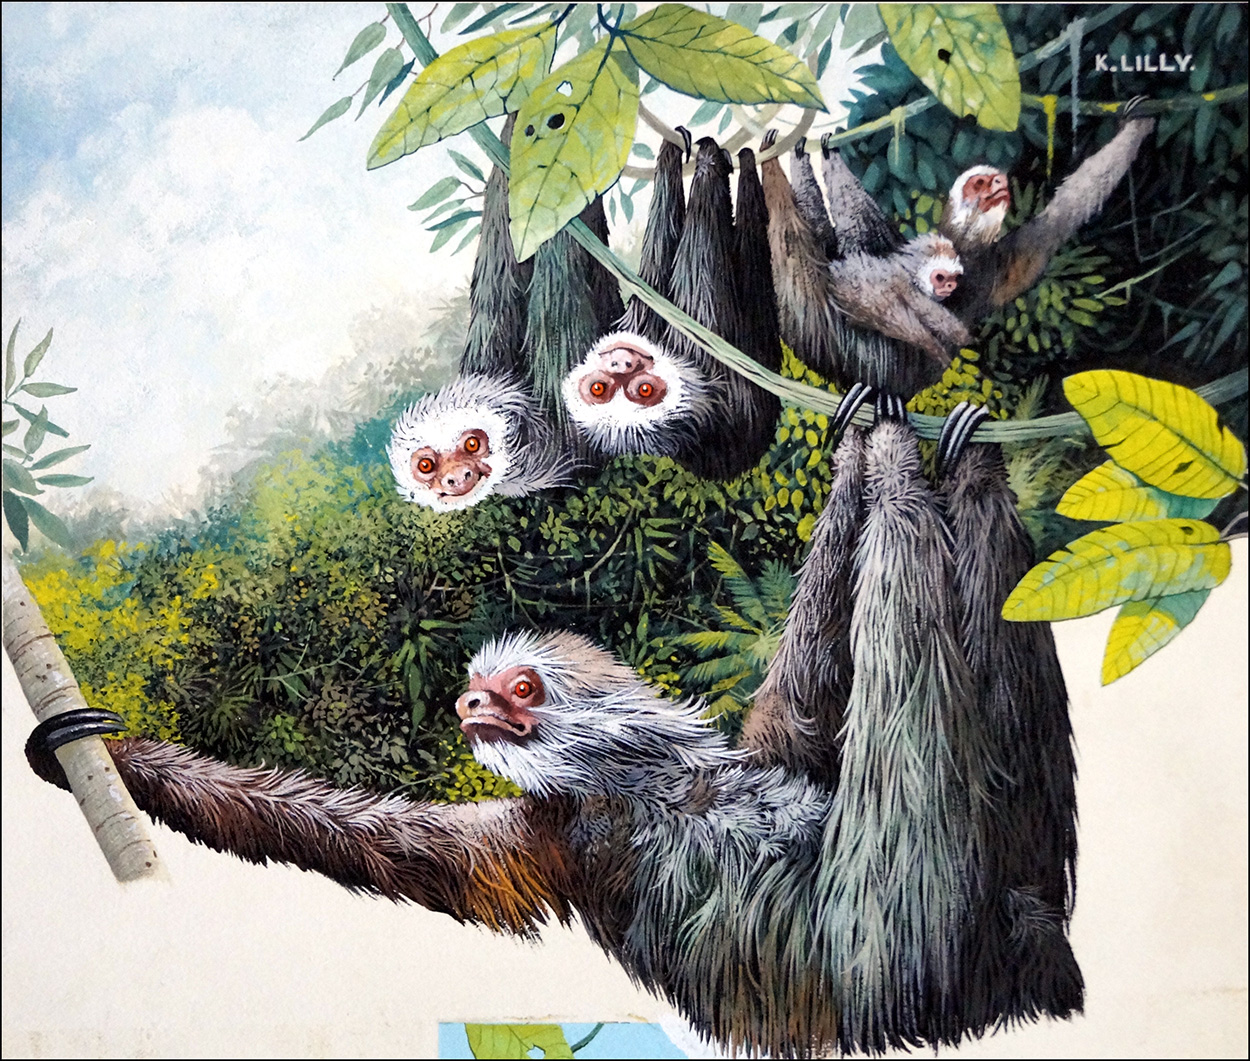 Hanging Around - The Sloth (Original) (Signed) art by Kenneth Lilly Art at The Illustration Art Gallery